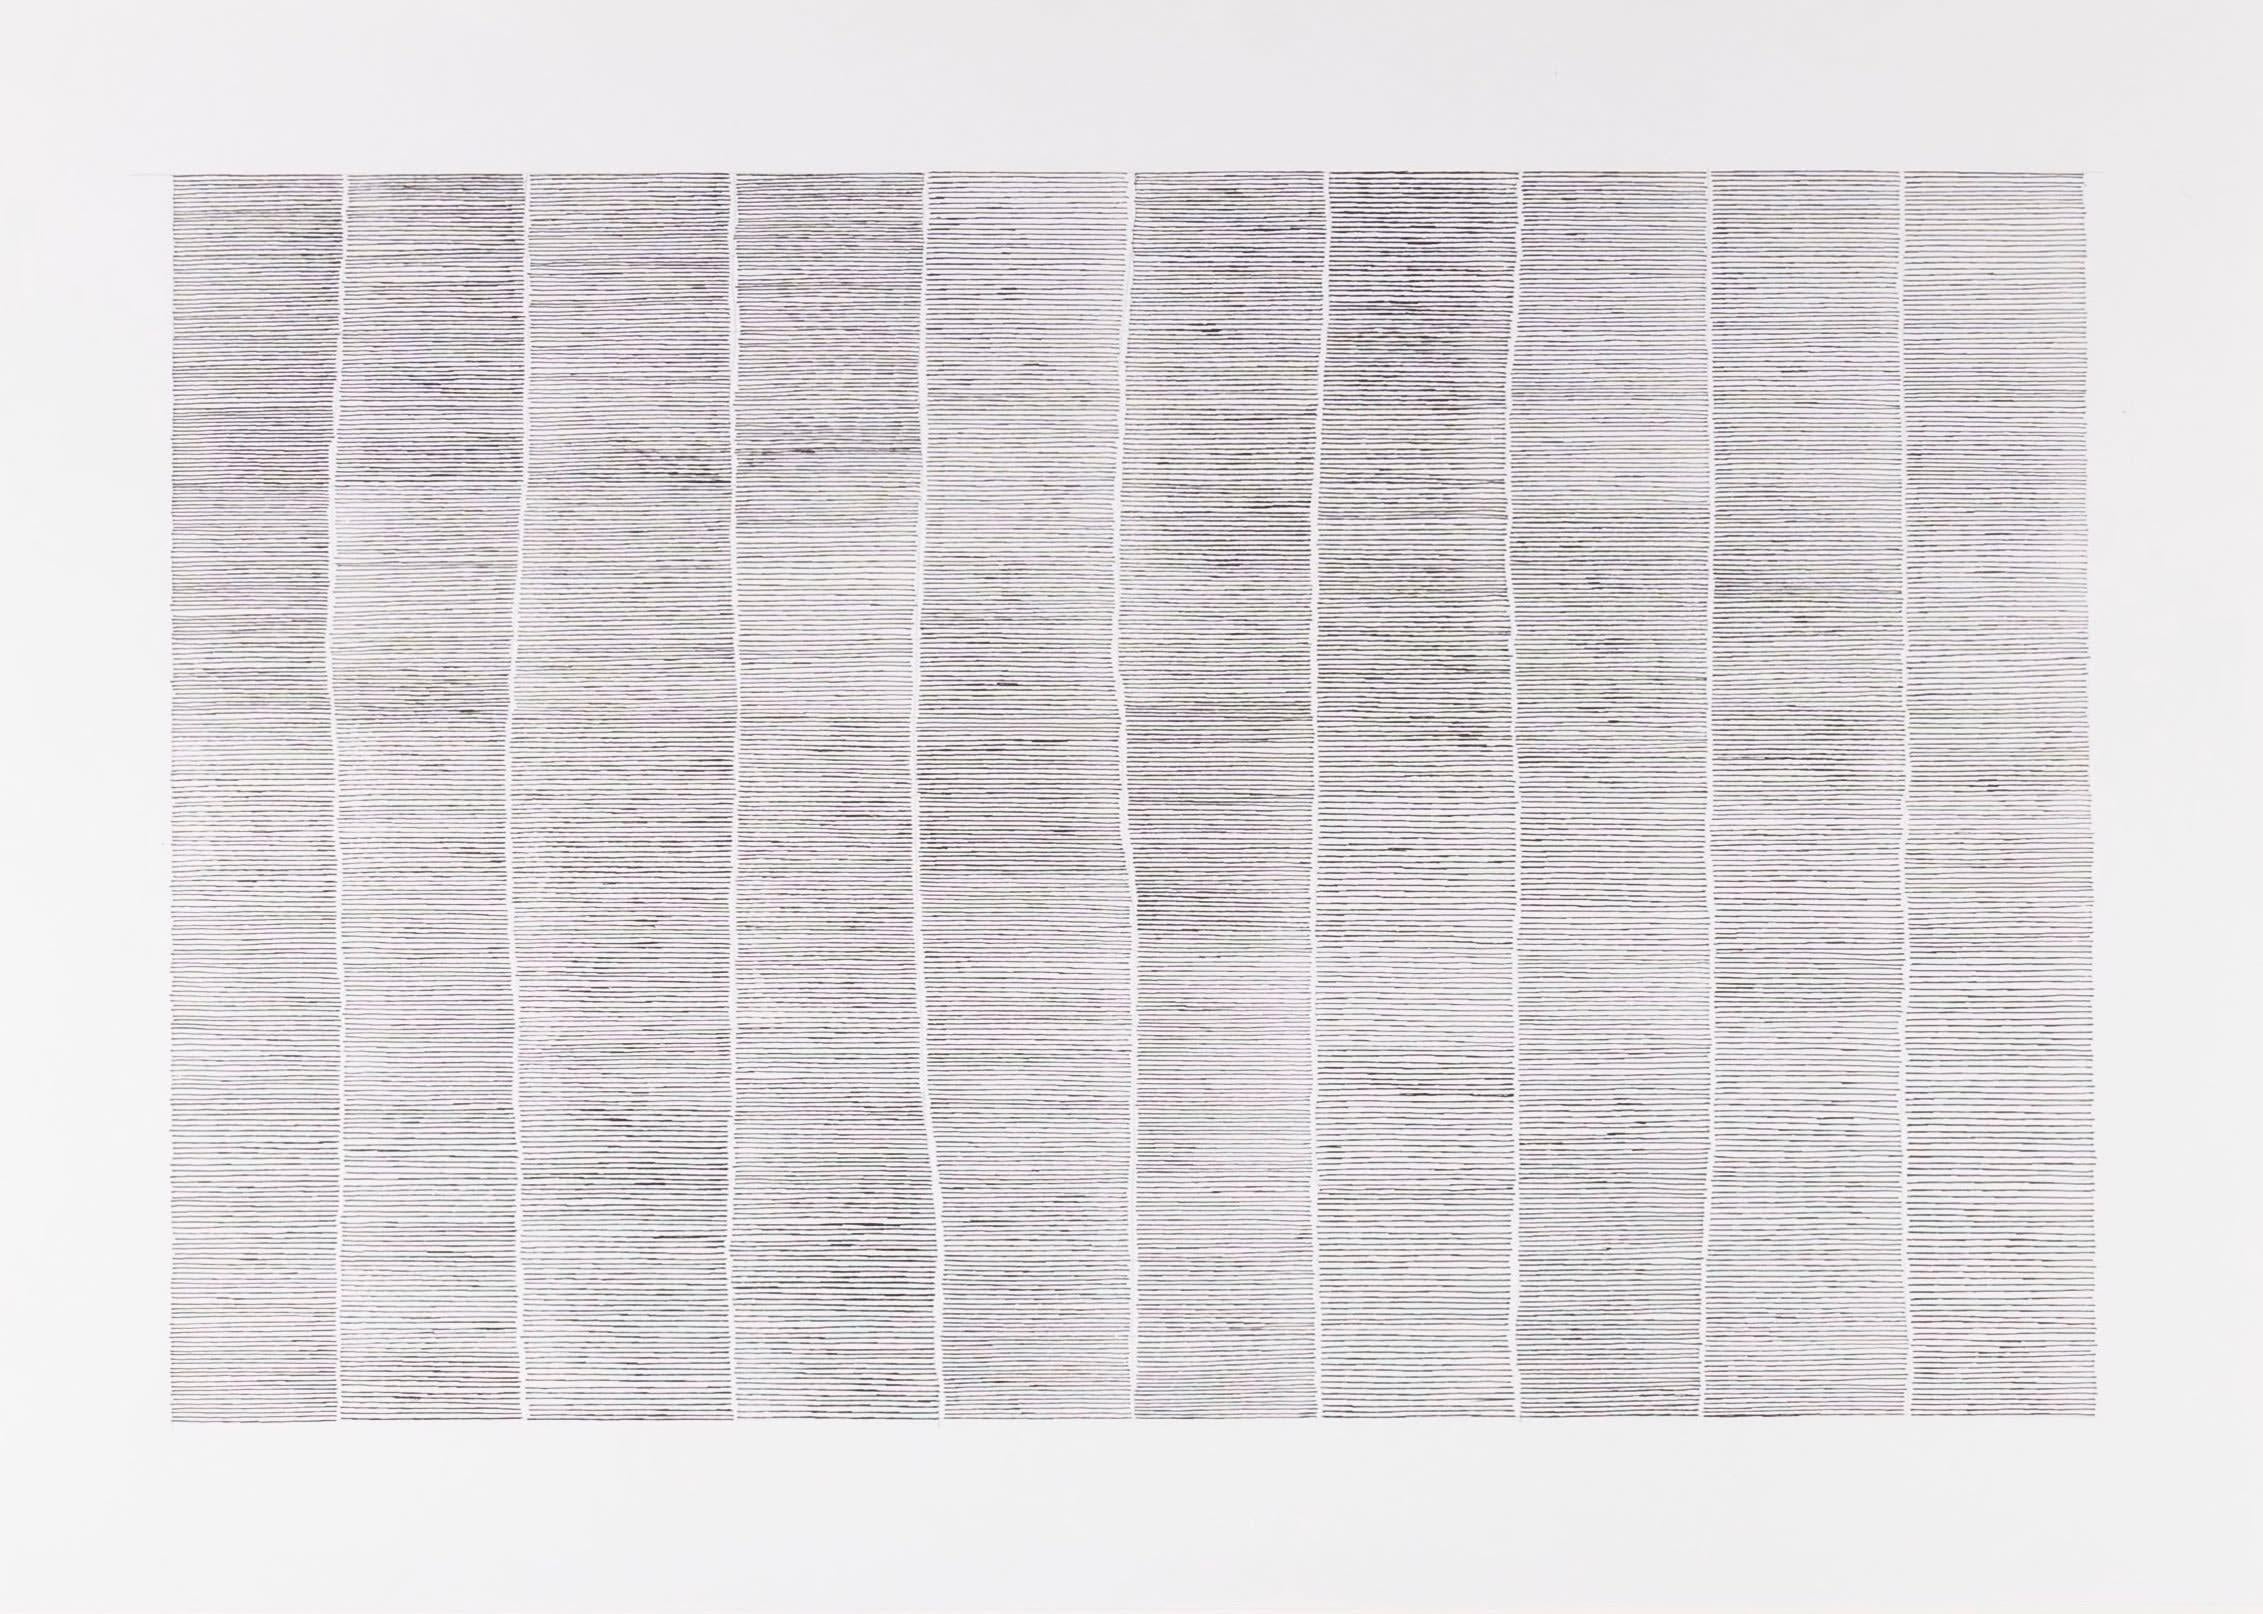 Untitled IX (Linear Motif), Pen on Paper Drawing by Jon Probert B. 1966, 2022

Additional information:
Medium: Pen on paper
Dimensions: 42 x 59.5 cm
16 1/2 x 23 3/8 in

Having studied Fine Art and Art History at Newcastle University and lived in